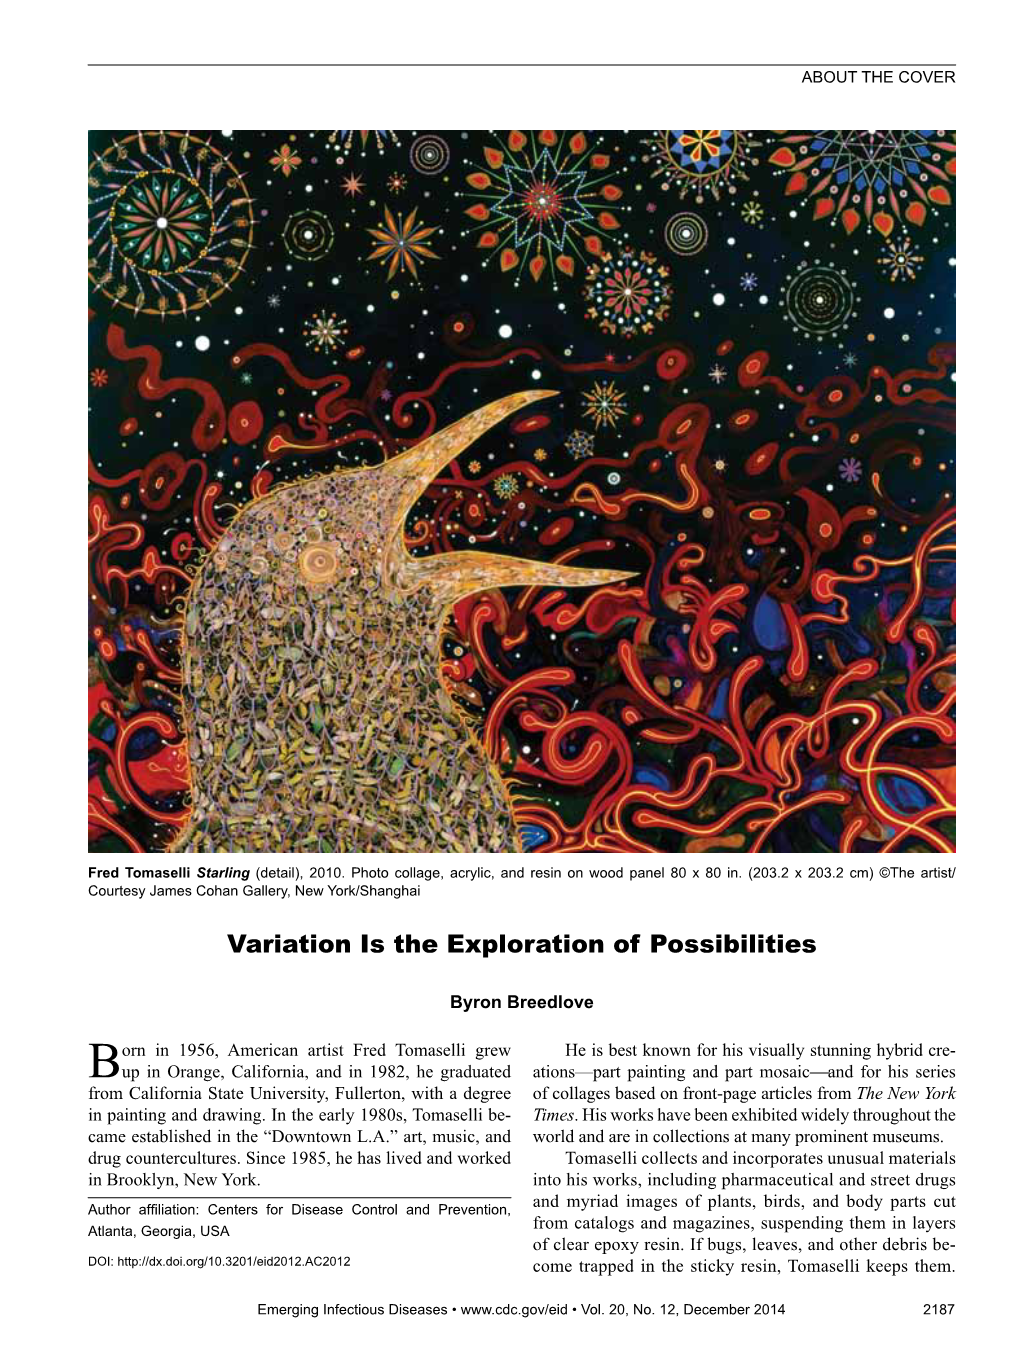 Variation Is the Exploration of Possibilities